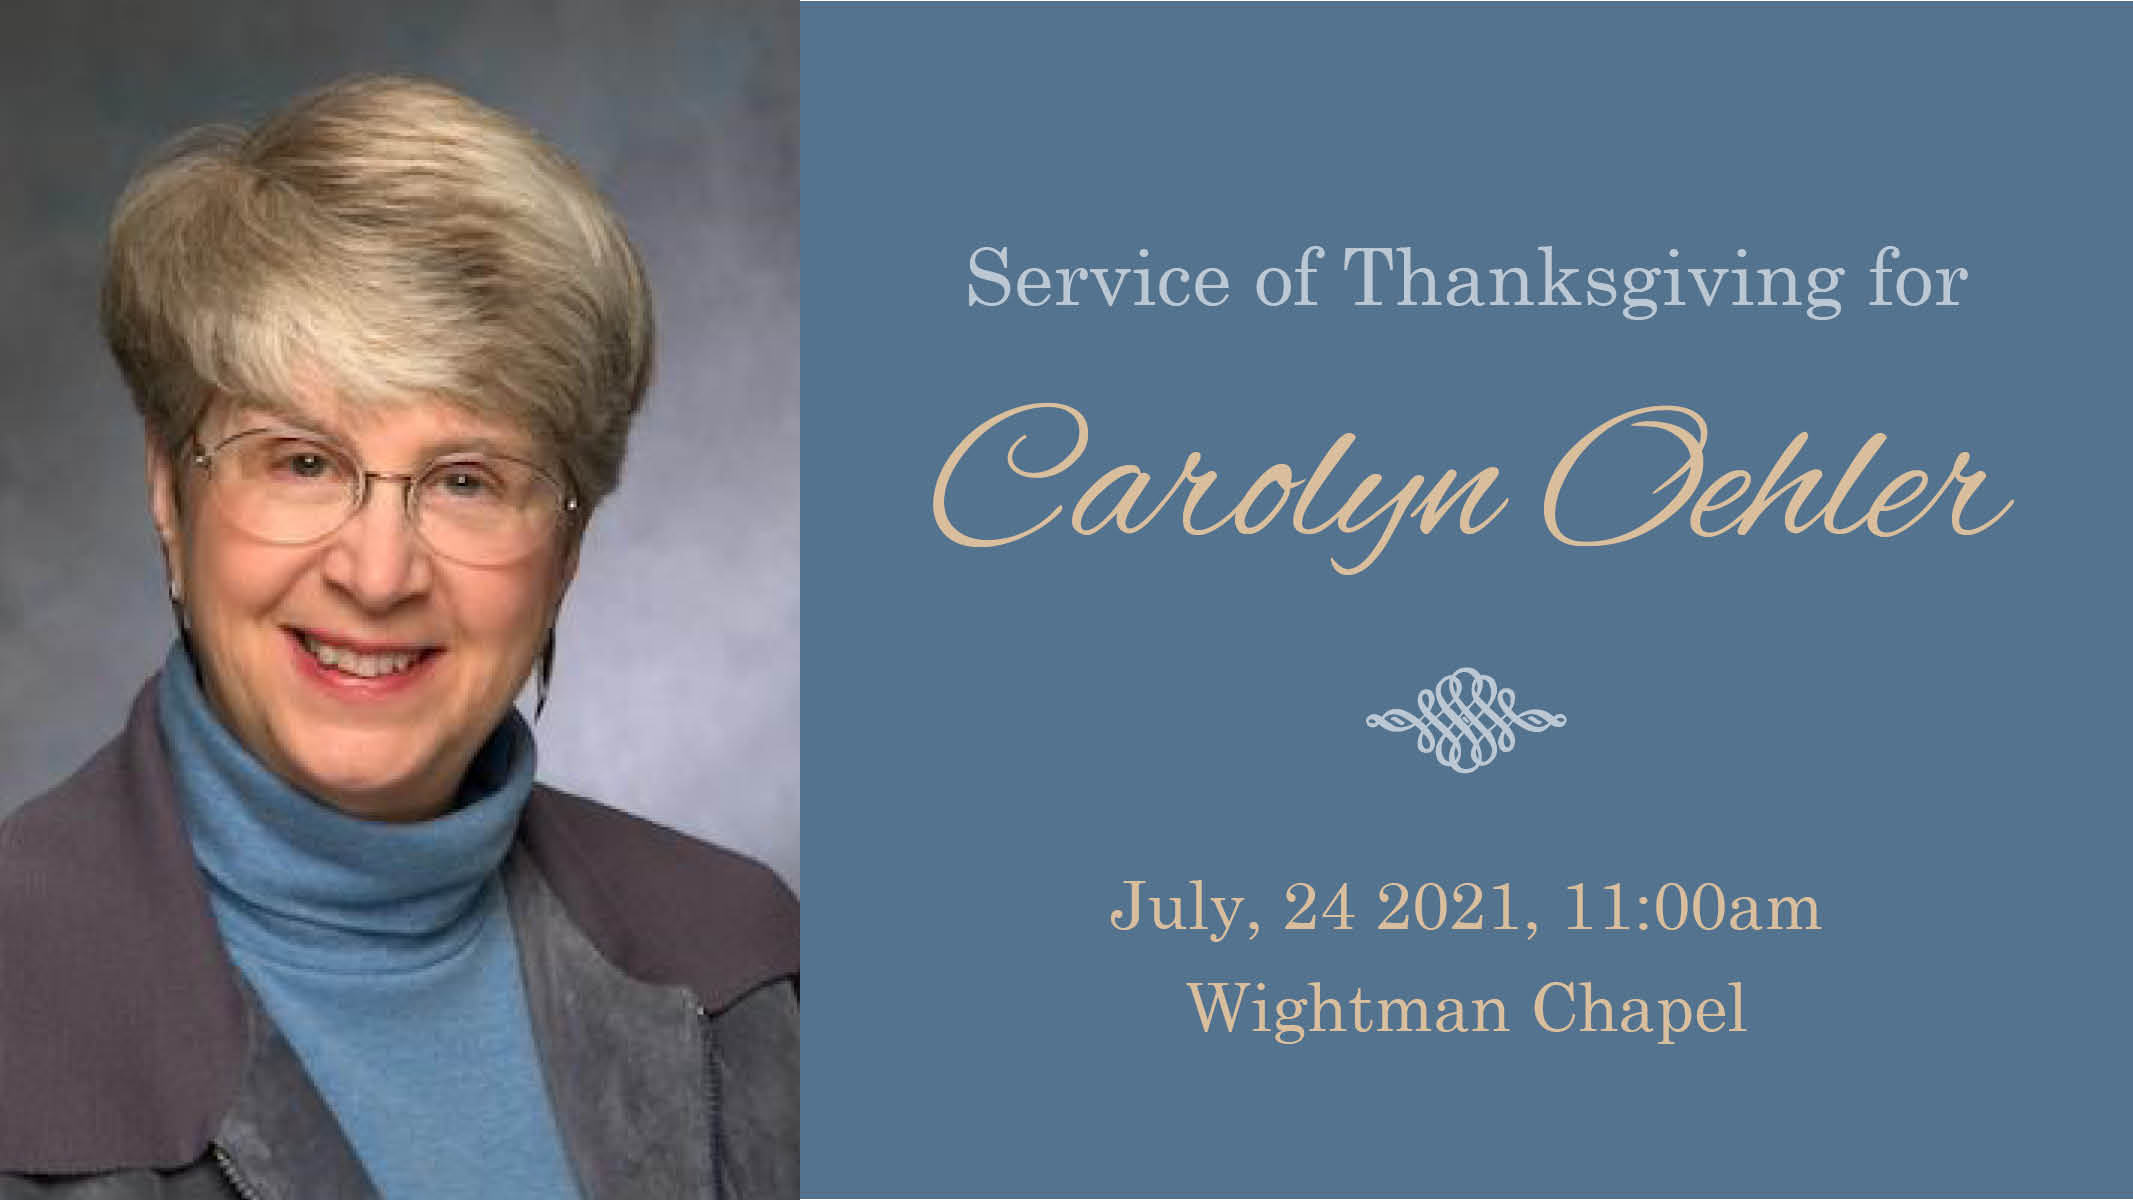 Service of Thanksgiving & Reception for Carolyn Oehler—July 24, 11am, Wightman Chapel